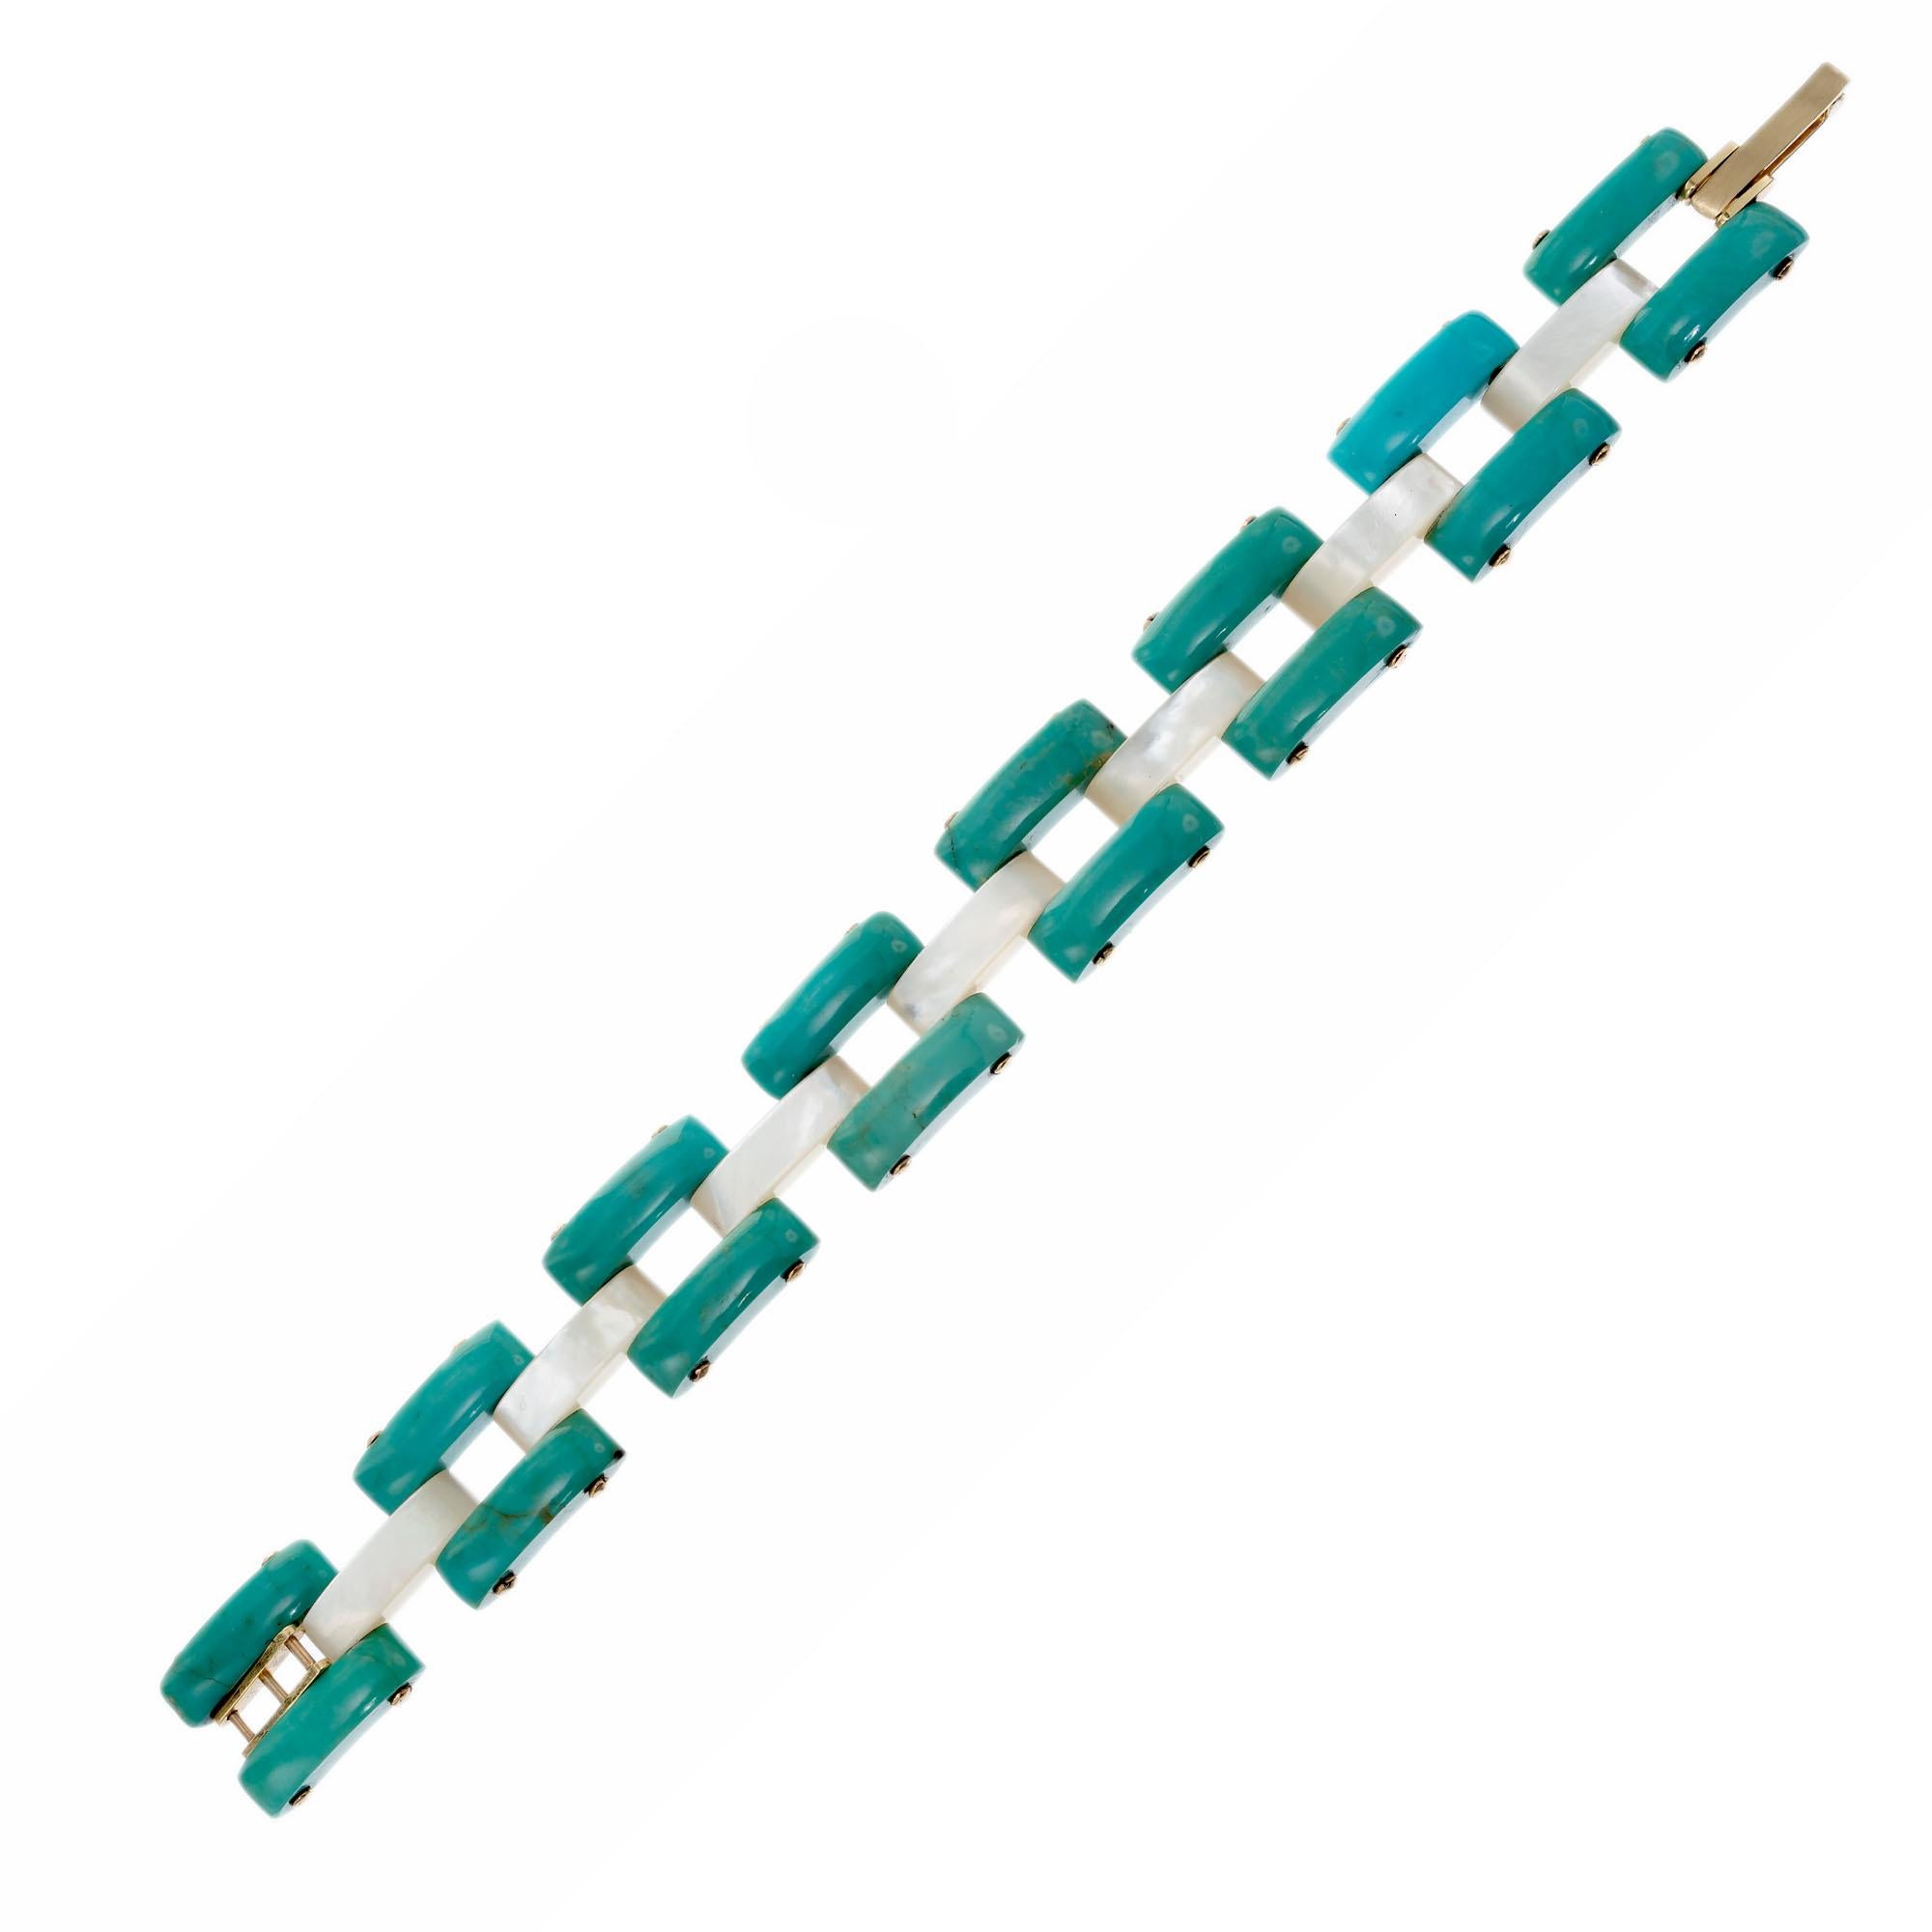 Natural turquoise and mother of pearl link bracelet with 14k gold rivets and catch. Circa 1940's. 7 inches in length. 

16 greenish blue turquoise bars 
7 white iridescent mother of pearl bars
14k yellow gold 
Stamped: 14k
21.9 grams
Bracelet: 7